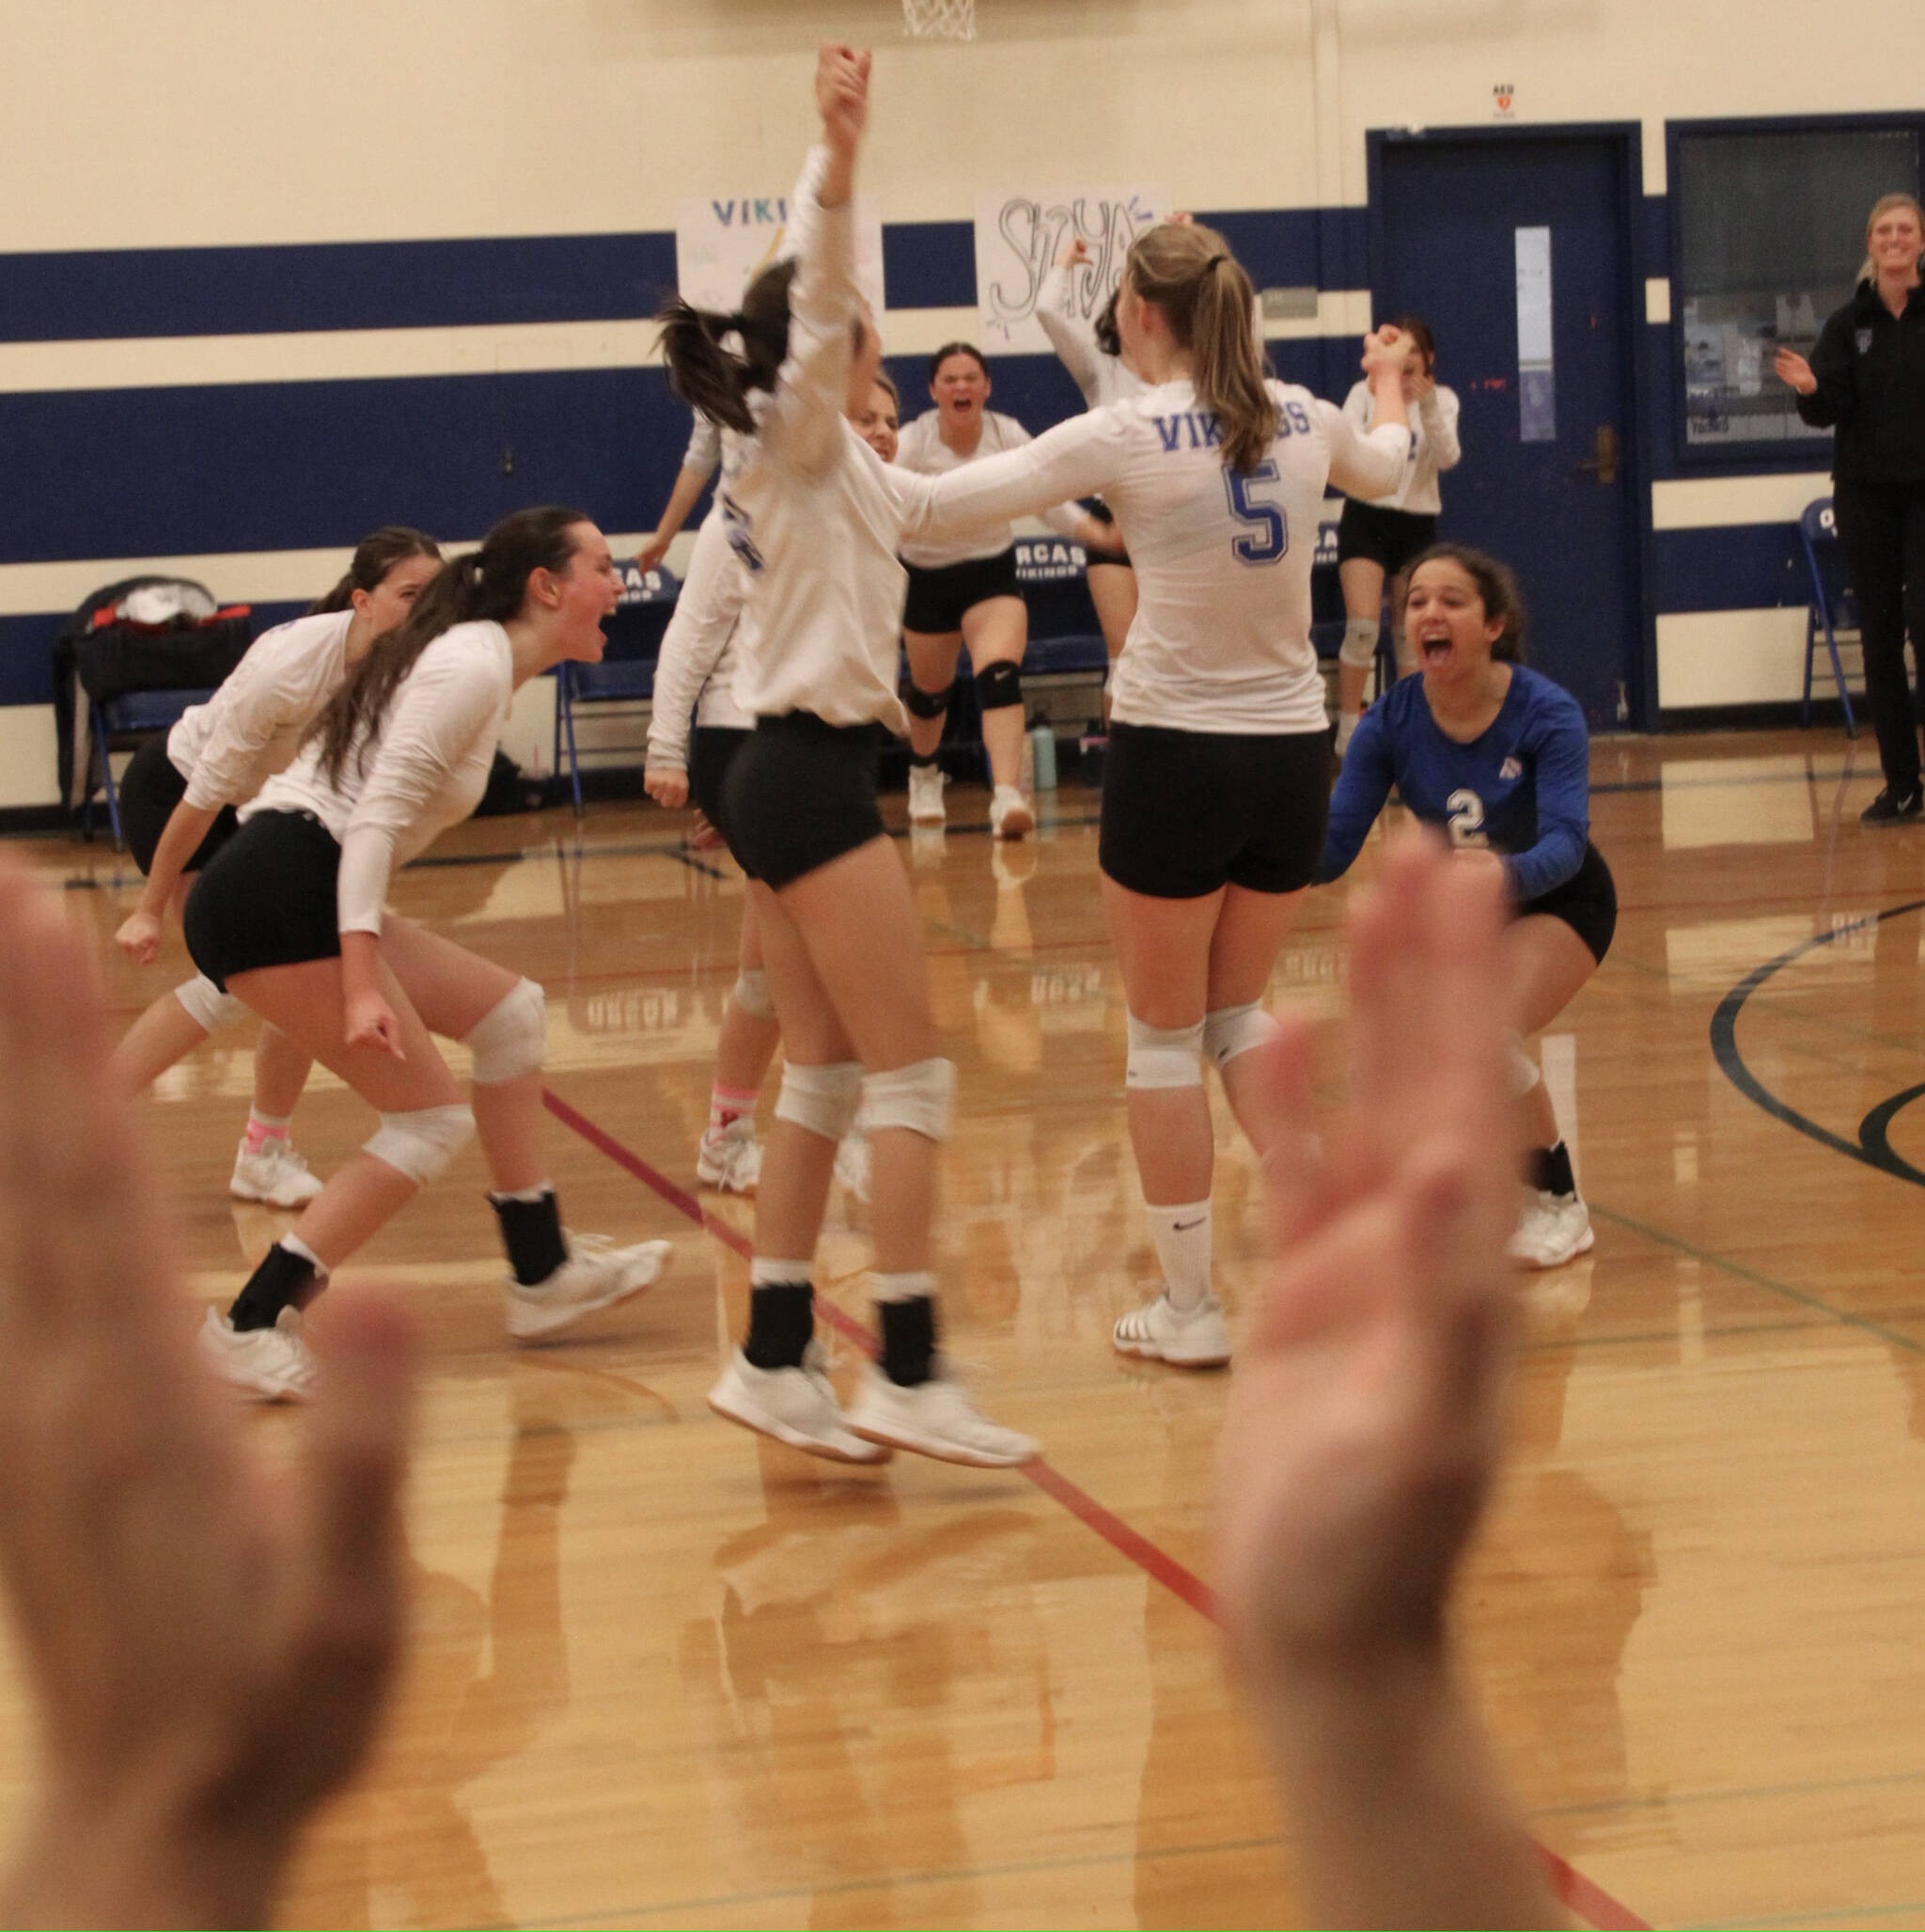 <strong>Corey Wiscomb photo </strong>
Lady Vikings celebrate the second set victory.